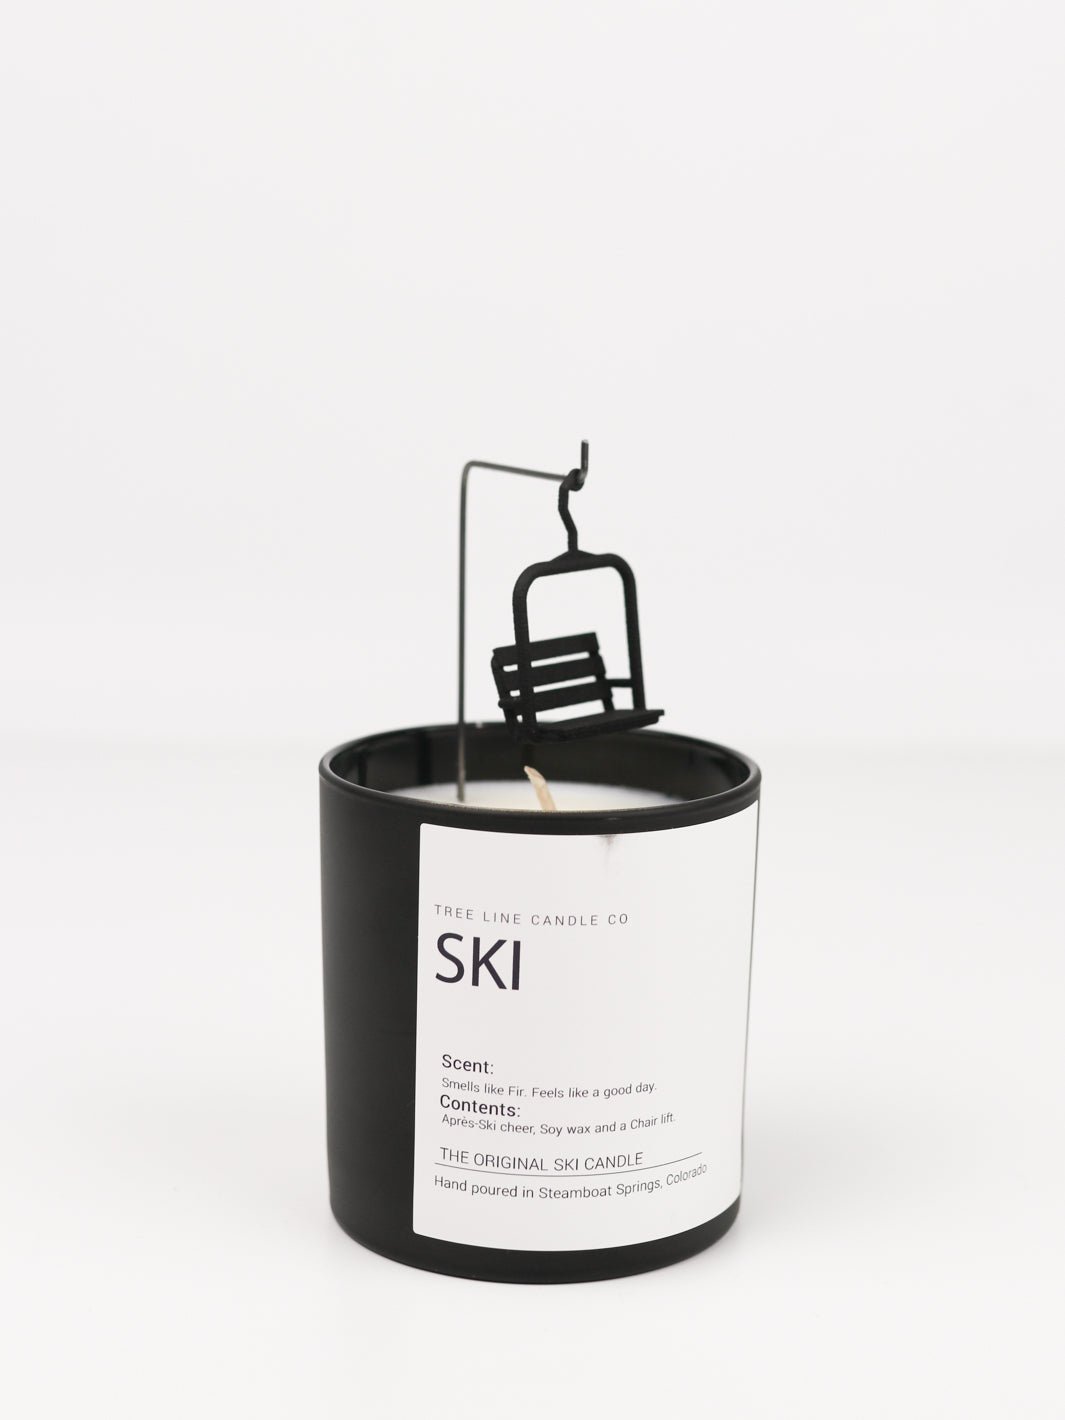 Ski Chairlift Candle - Heyday